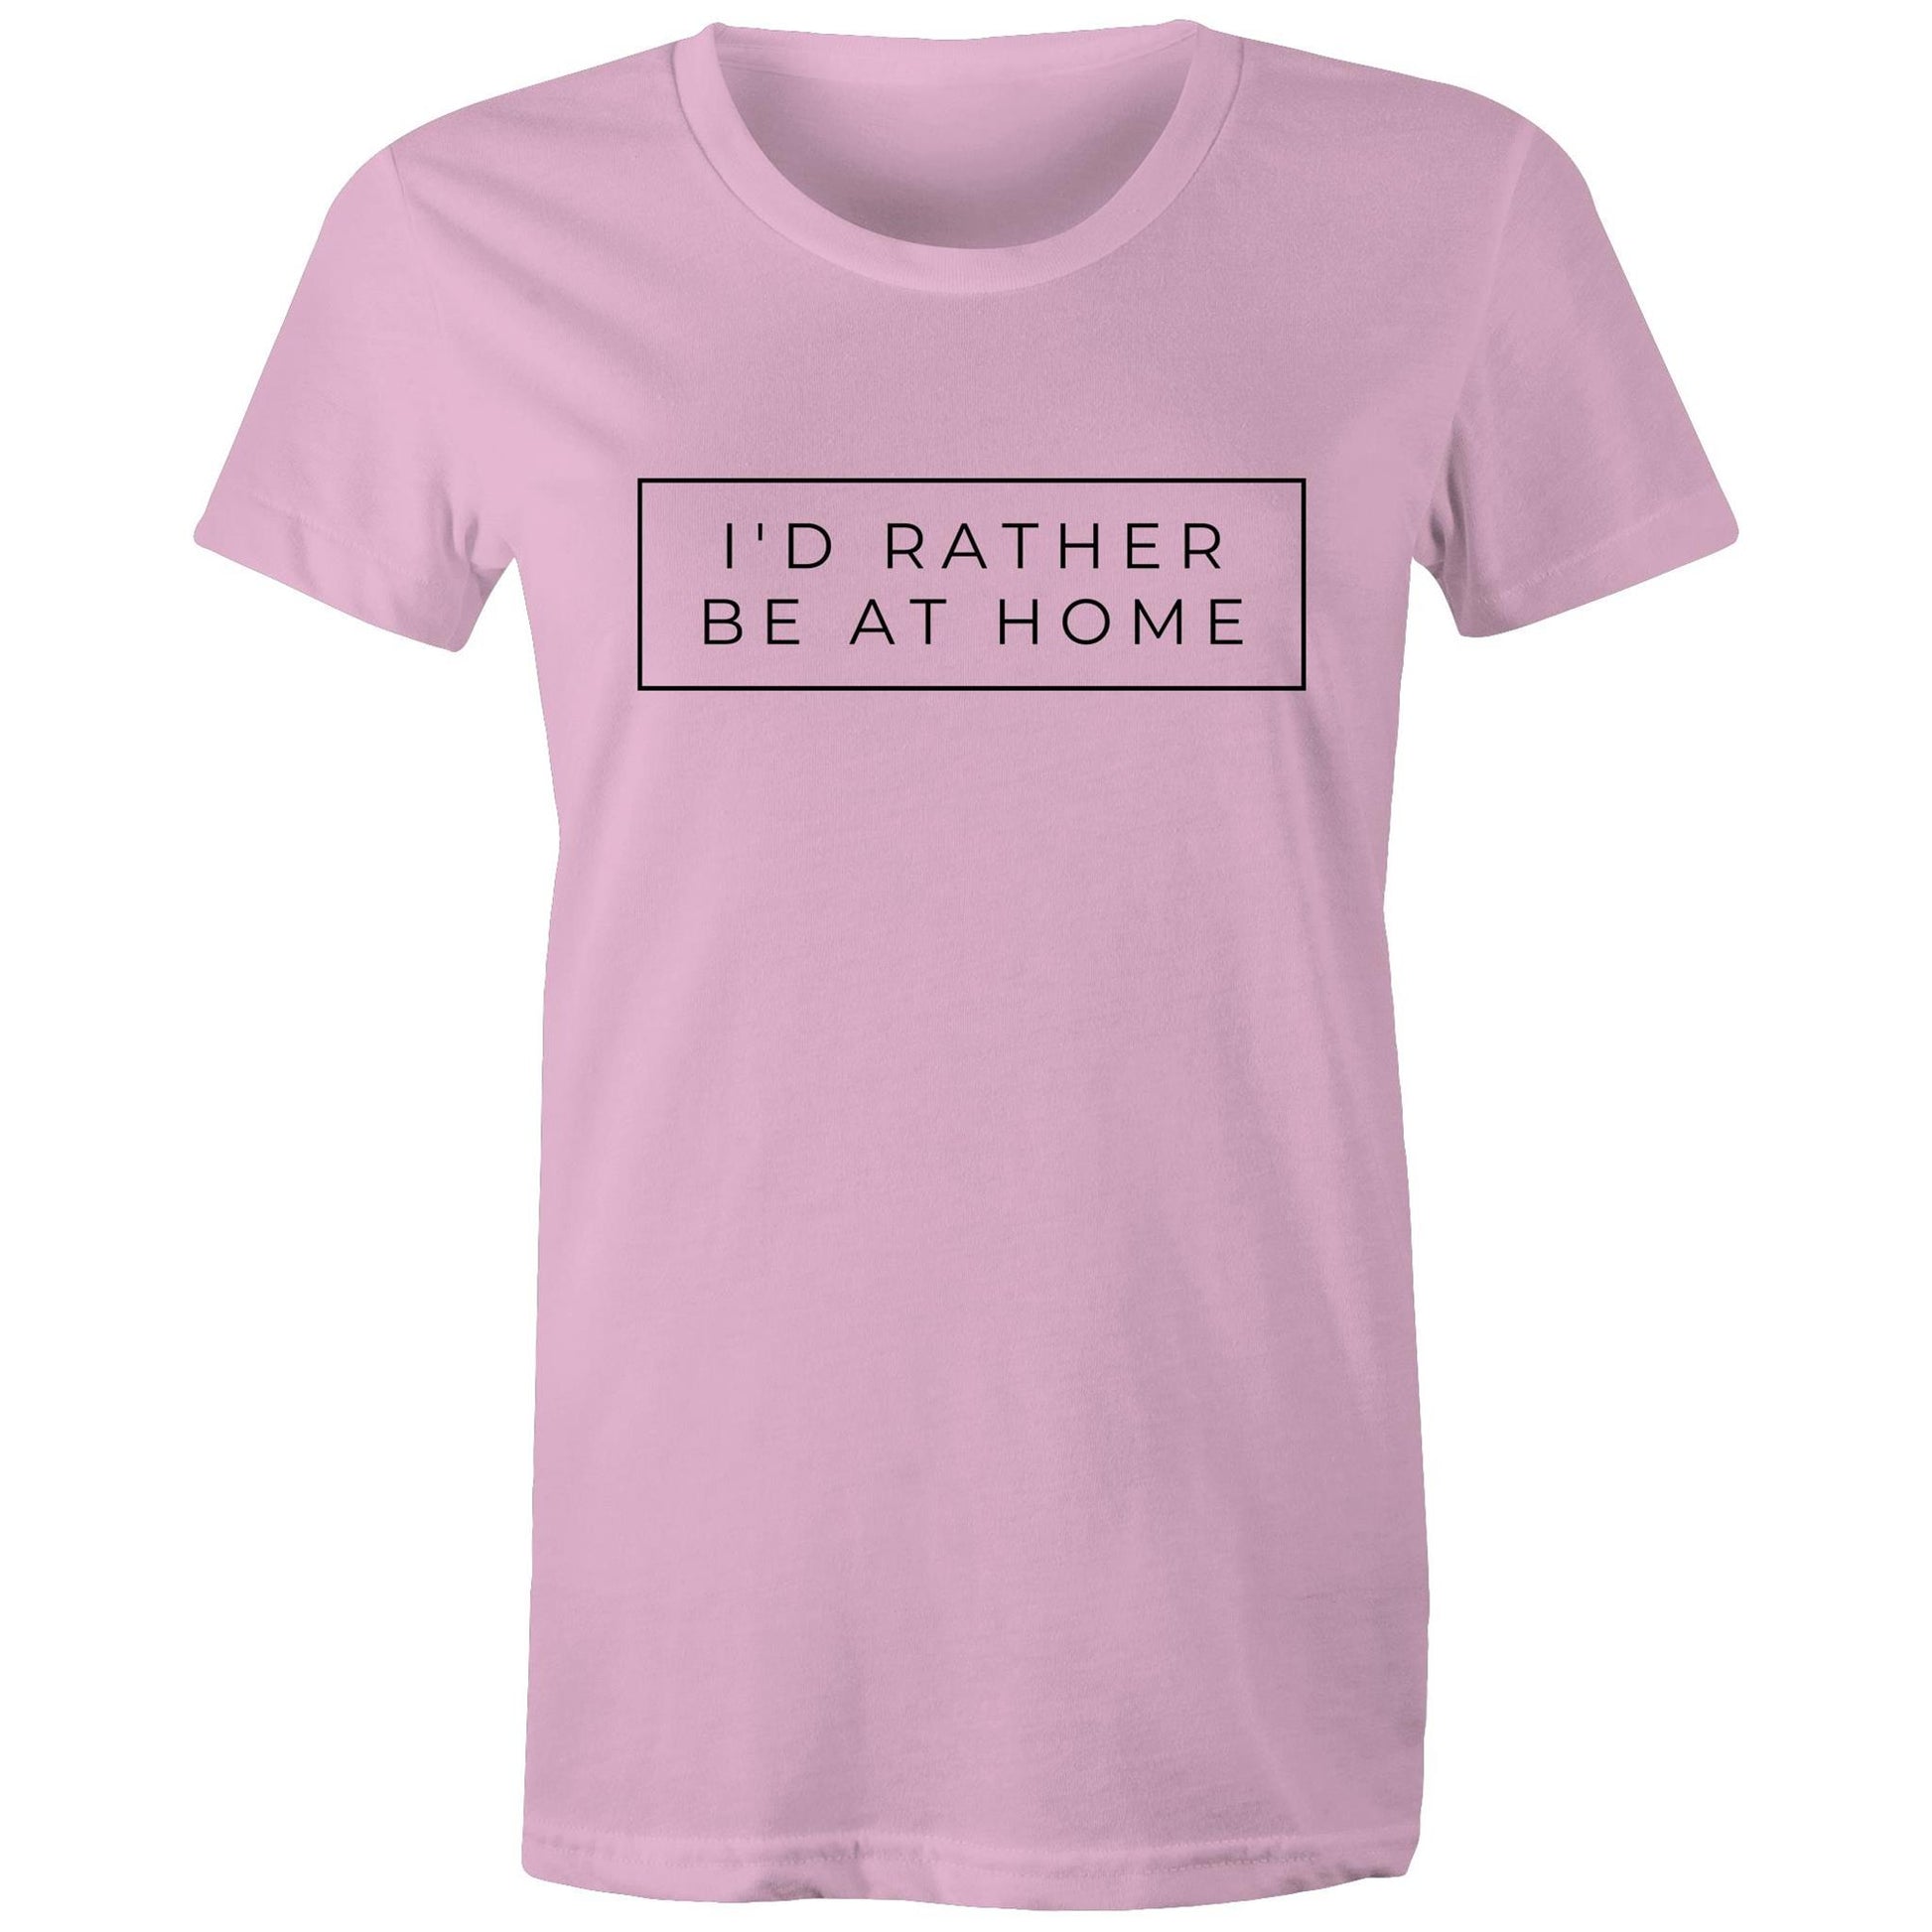 I'd Rather Be At Home - Womens T-shirt Pink Womens T-shirt home